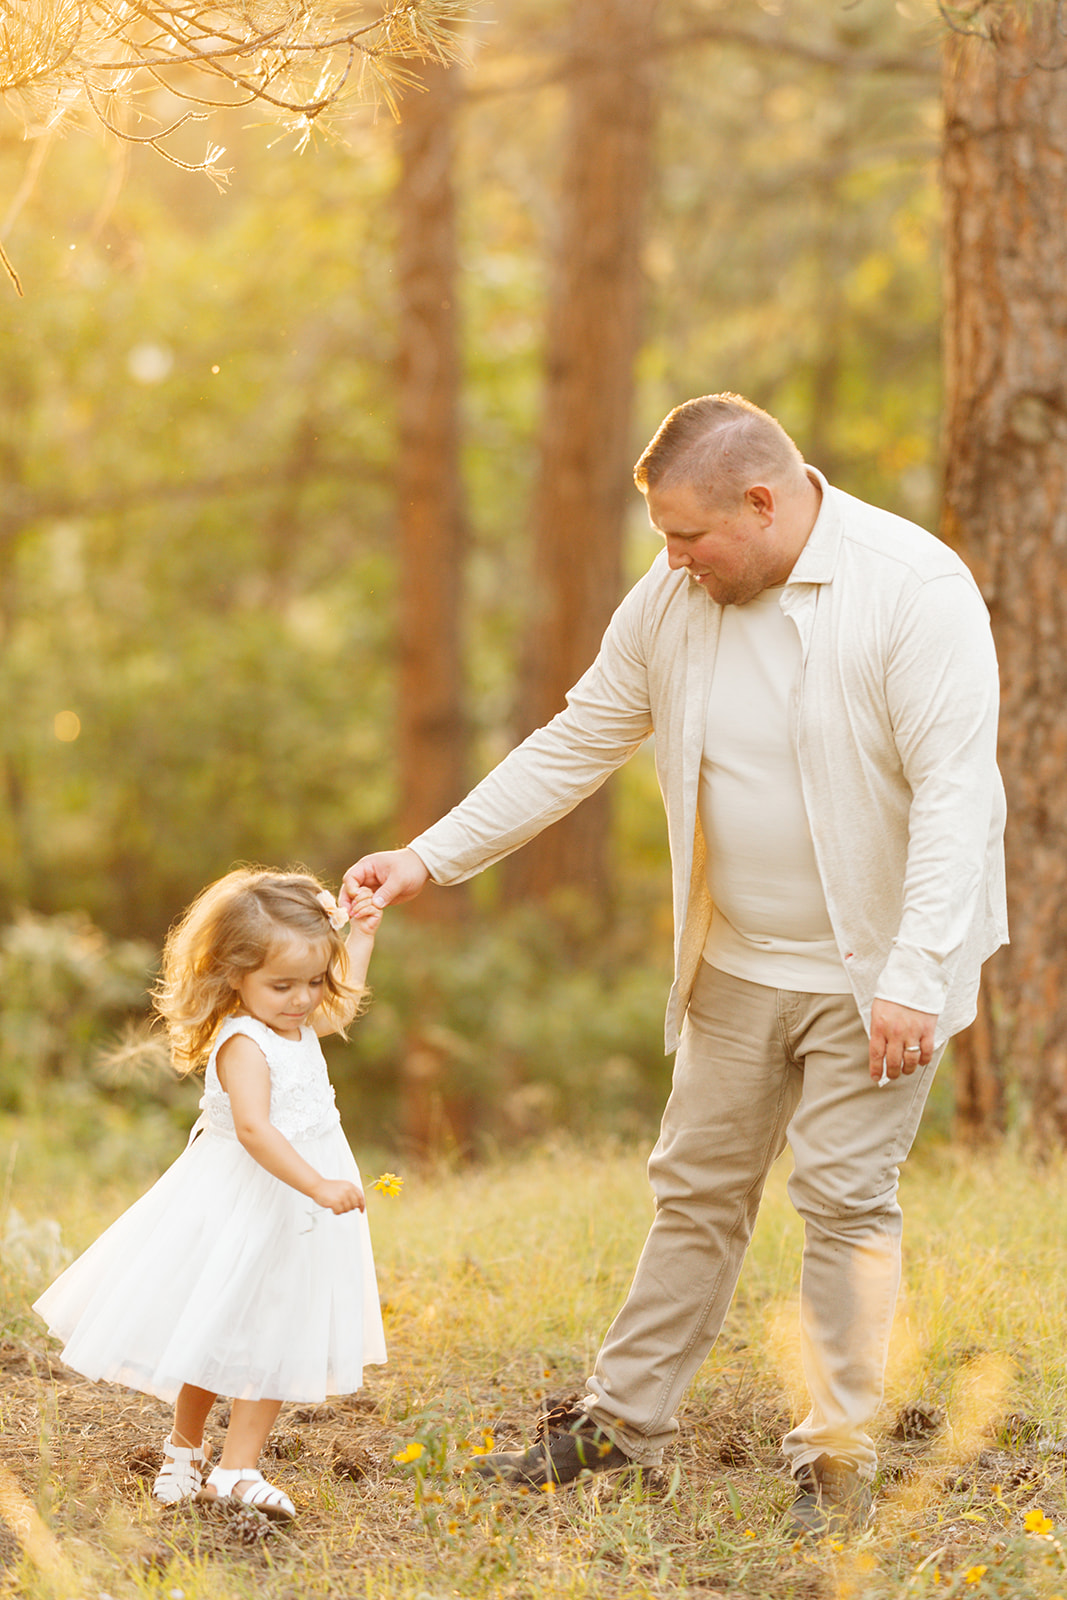 neutral outfits for fall family photos in castle rock colorado with pine trees and forest 80108 daddy daughter dance